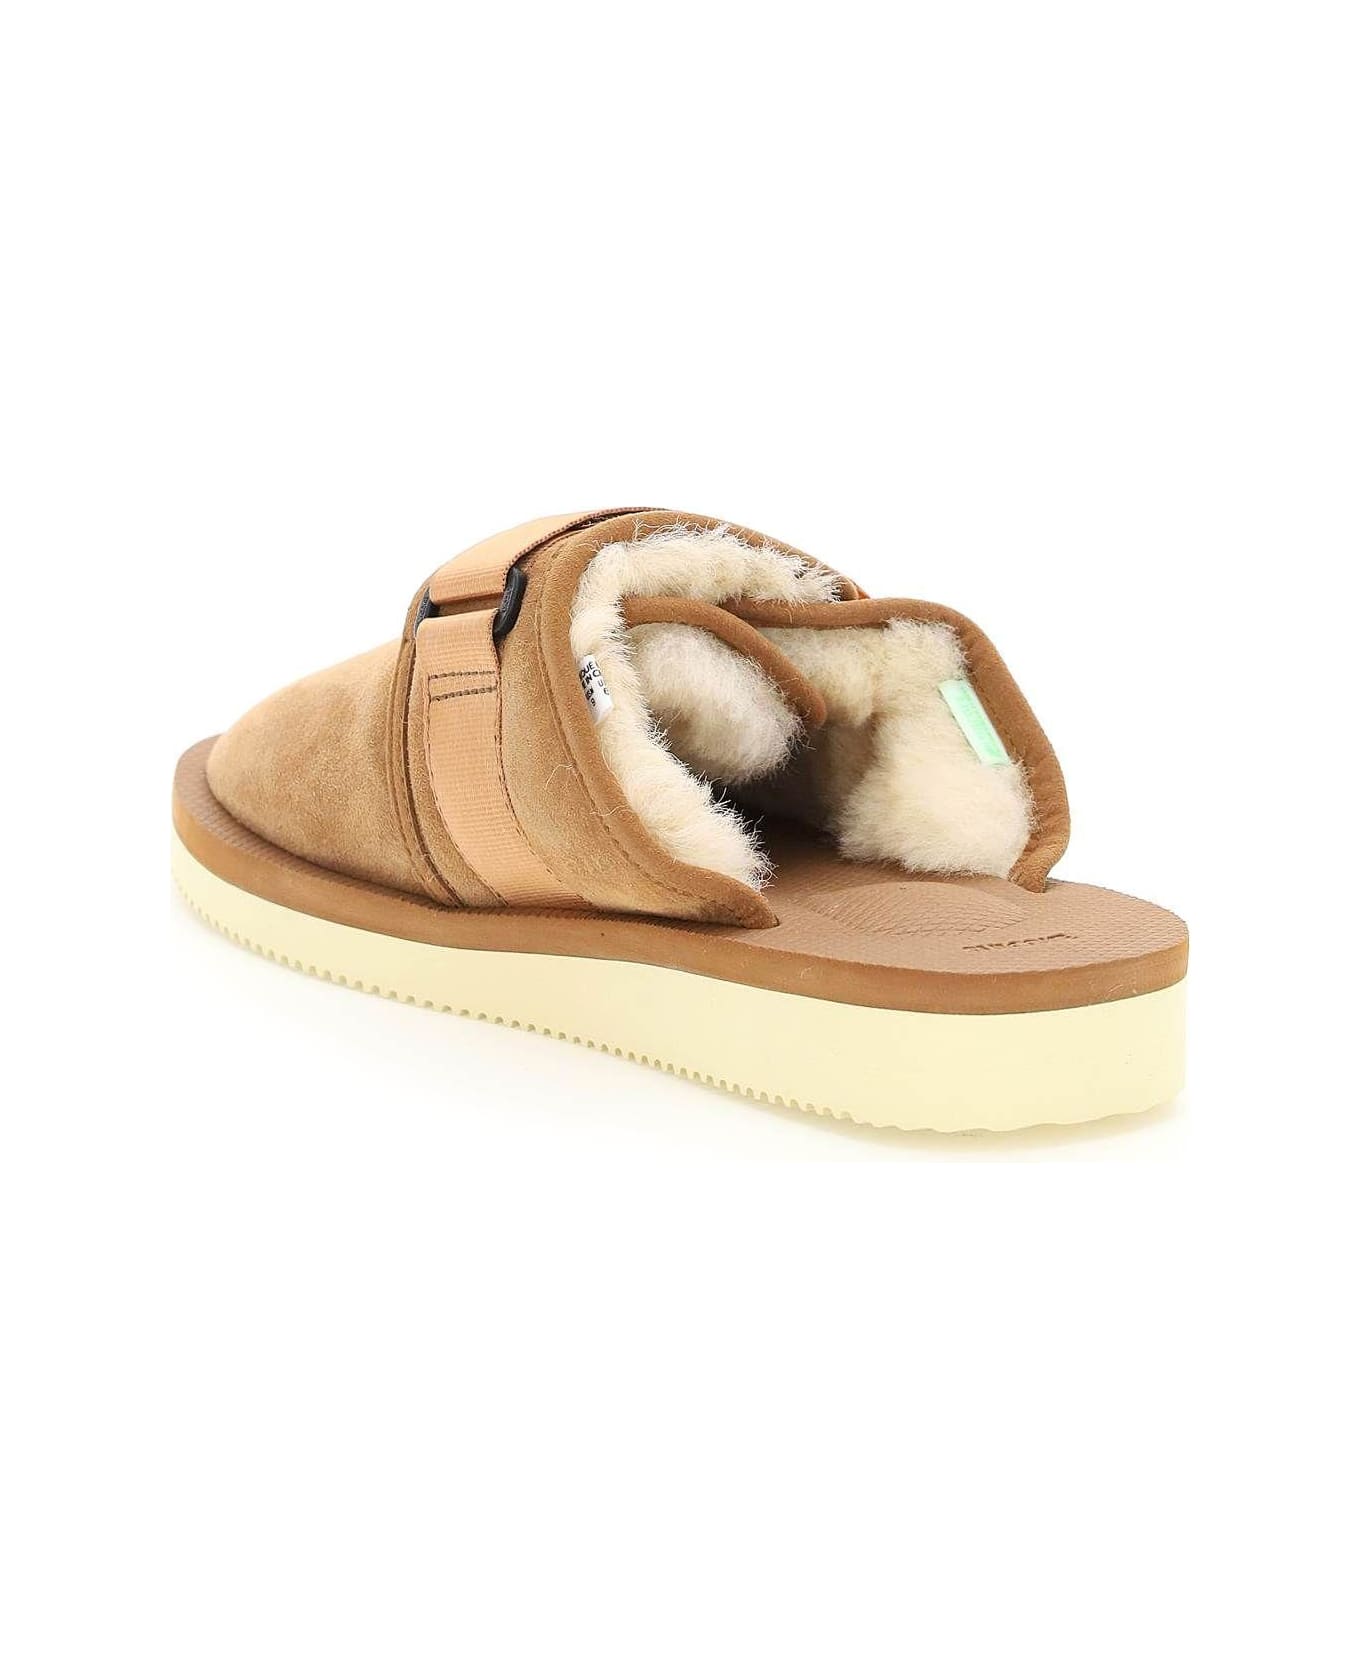 SUICOKE Zavo Suede Sabot With Shearling - BROWN その他各種シューズ